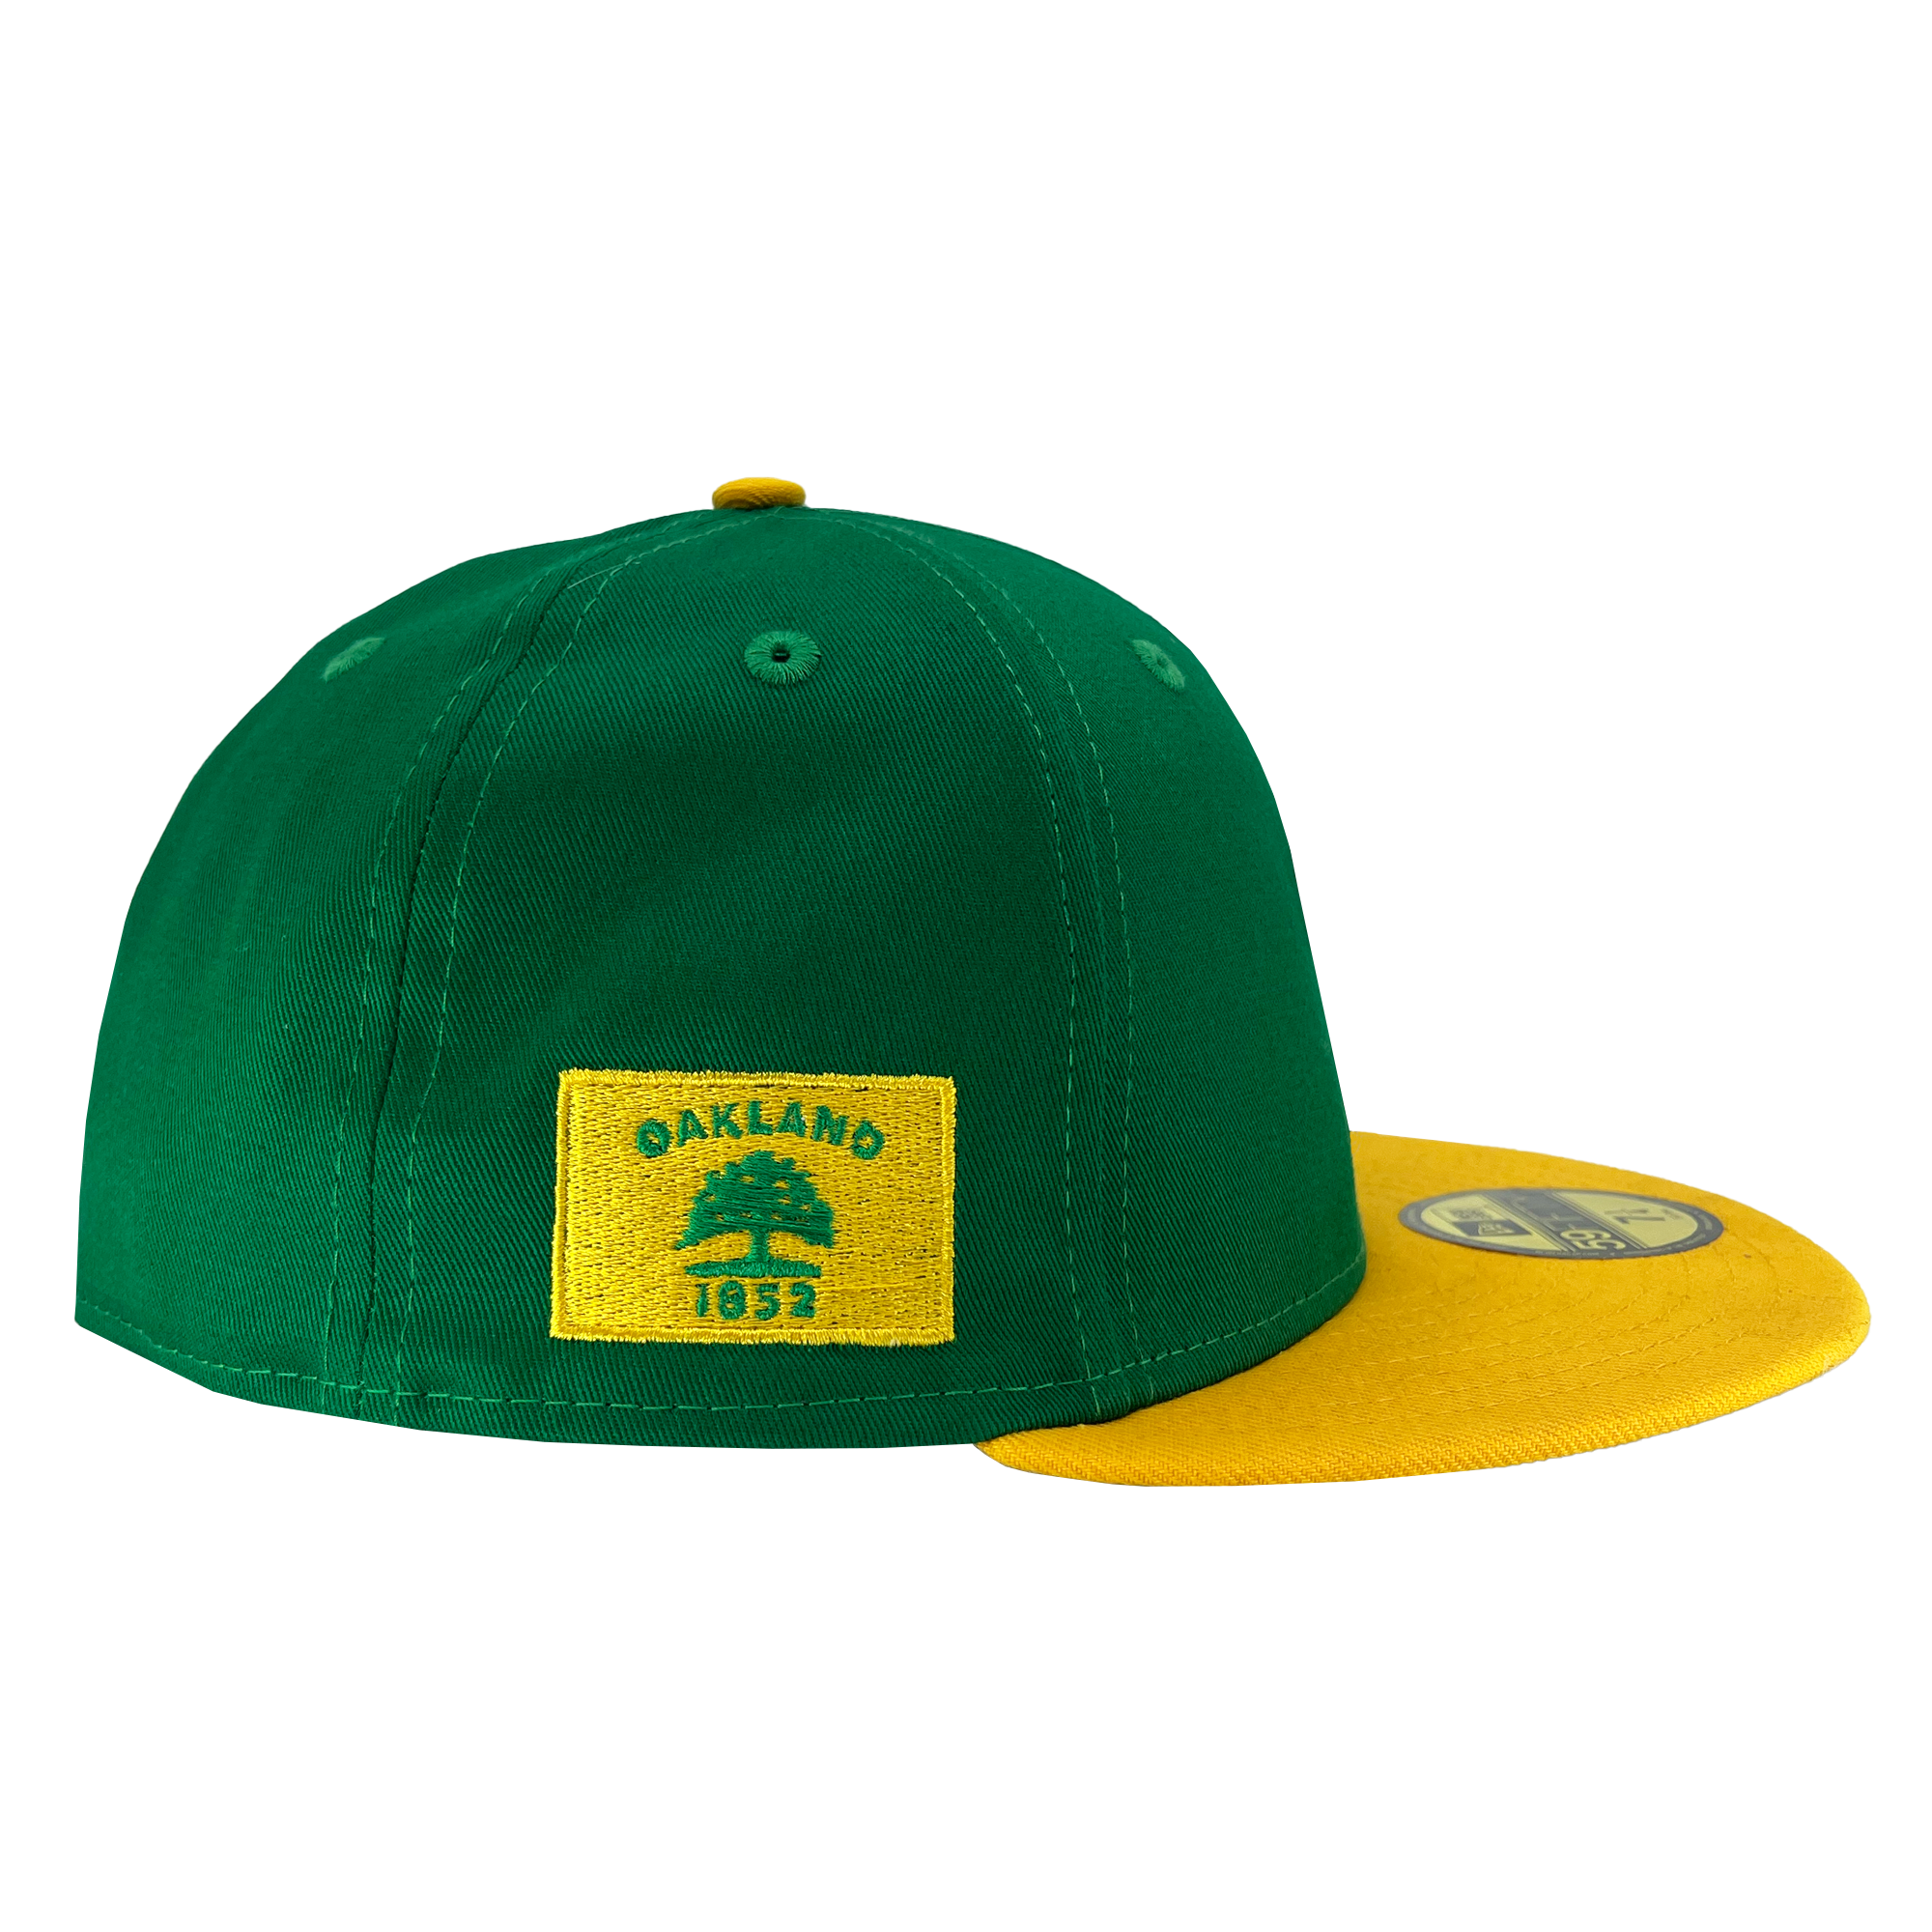 Side view of New Era Cap with yellow Oakland Flag Embroidery.